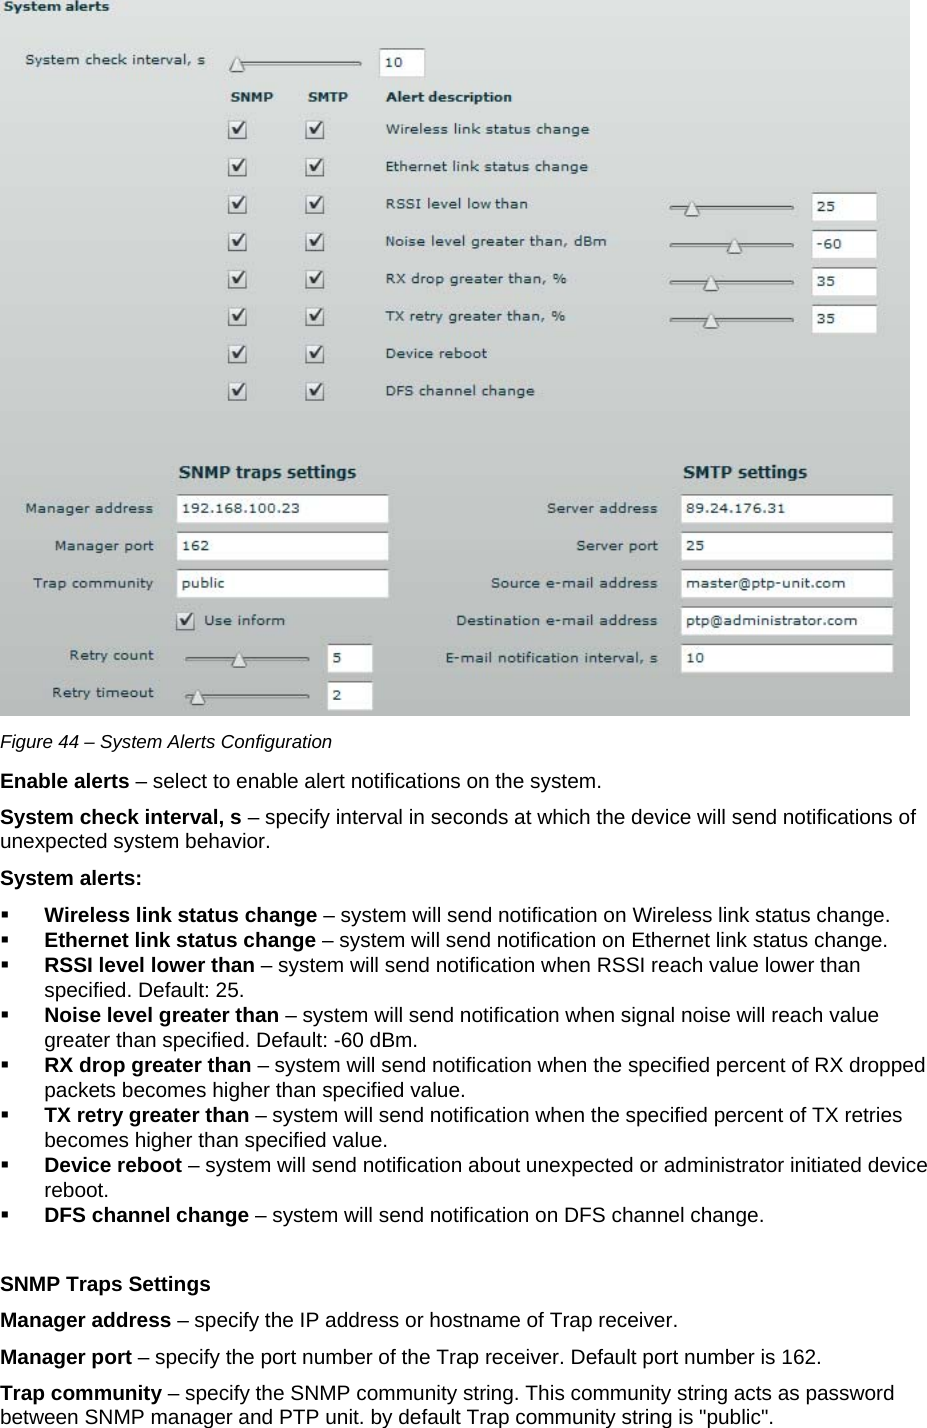  LigoWave Page 38  Figure 44 – System Alerts Configuration Enable alerts – select to enable alert notifications on the system.  System check interval, s – specify interval in seconds at which the device will send notifications of unexpected system behavior.  System alerts:   Wireless link status change – system will send notification on Wireless link status change.   Ethernet link status change – system will send notification on Ethernet link status change.   RSSI level lower than – system will send notification when RSSI reach value lower than specified. Default: 25.  Noise level greater than – system will send notification when signal noise will reach value greater than specified. Default: -60 dBm.   RX drop greater than – system will send notification when the specified percent of RX dropped packets becomes higher than specified value.  TX retry greater than – system will send notification when the specified percent of TX retries becomes higher than specified value.   Device reboot – system will send notification about unexpected or administrator initiated device reboot.   DFS channel change – system will send notification on DFS channel change.   SNMP Traps Settings Manager address – specify the IP address or hostname of Trap receiver.  Manager port – specify the port number of the Trap receiver. Default port number is 162.  Trap community – specify the SNMP community string. This community string acts as password between SNMP manager and PTP unit. by default Trap community string is &quot;public&quot;.  